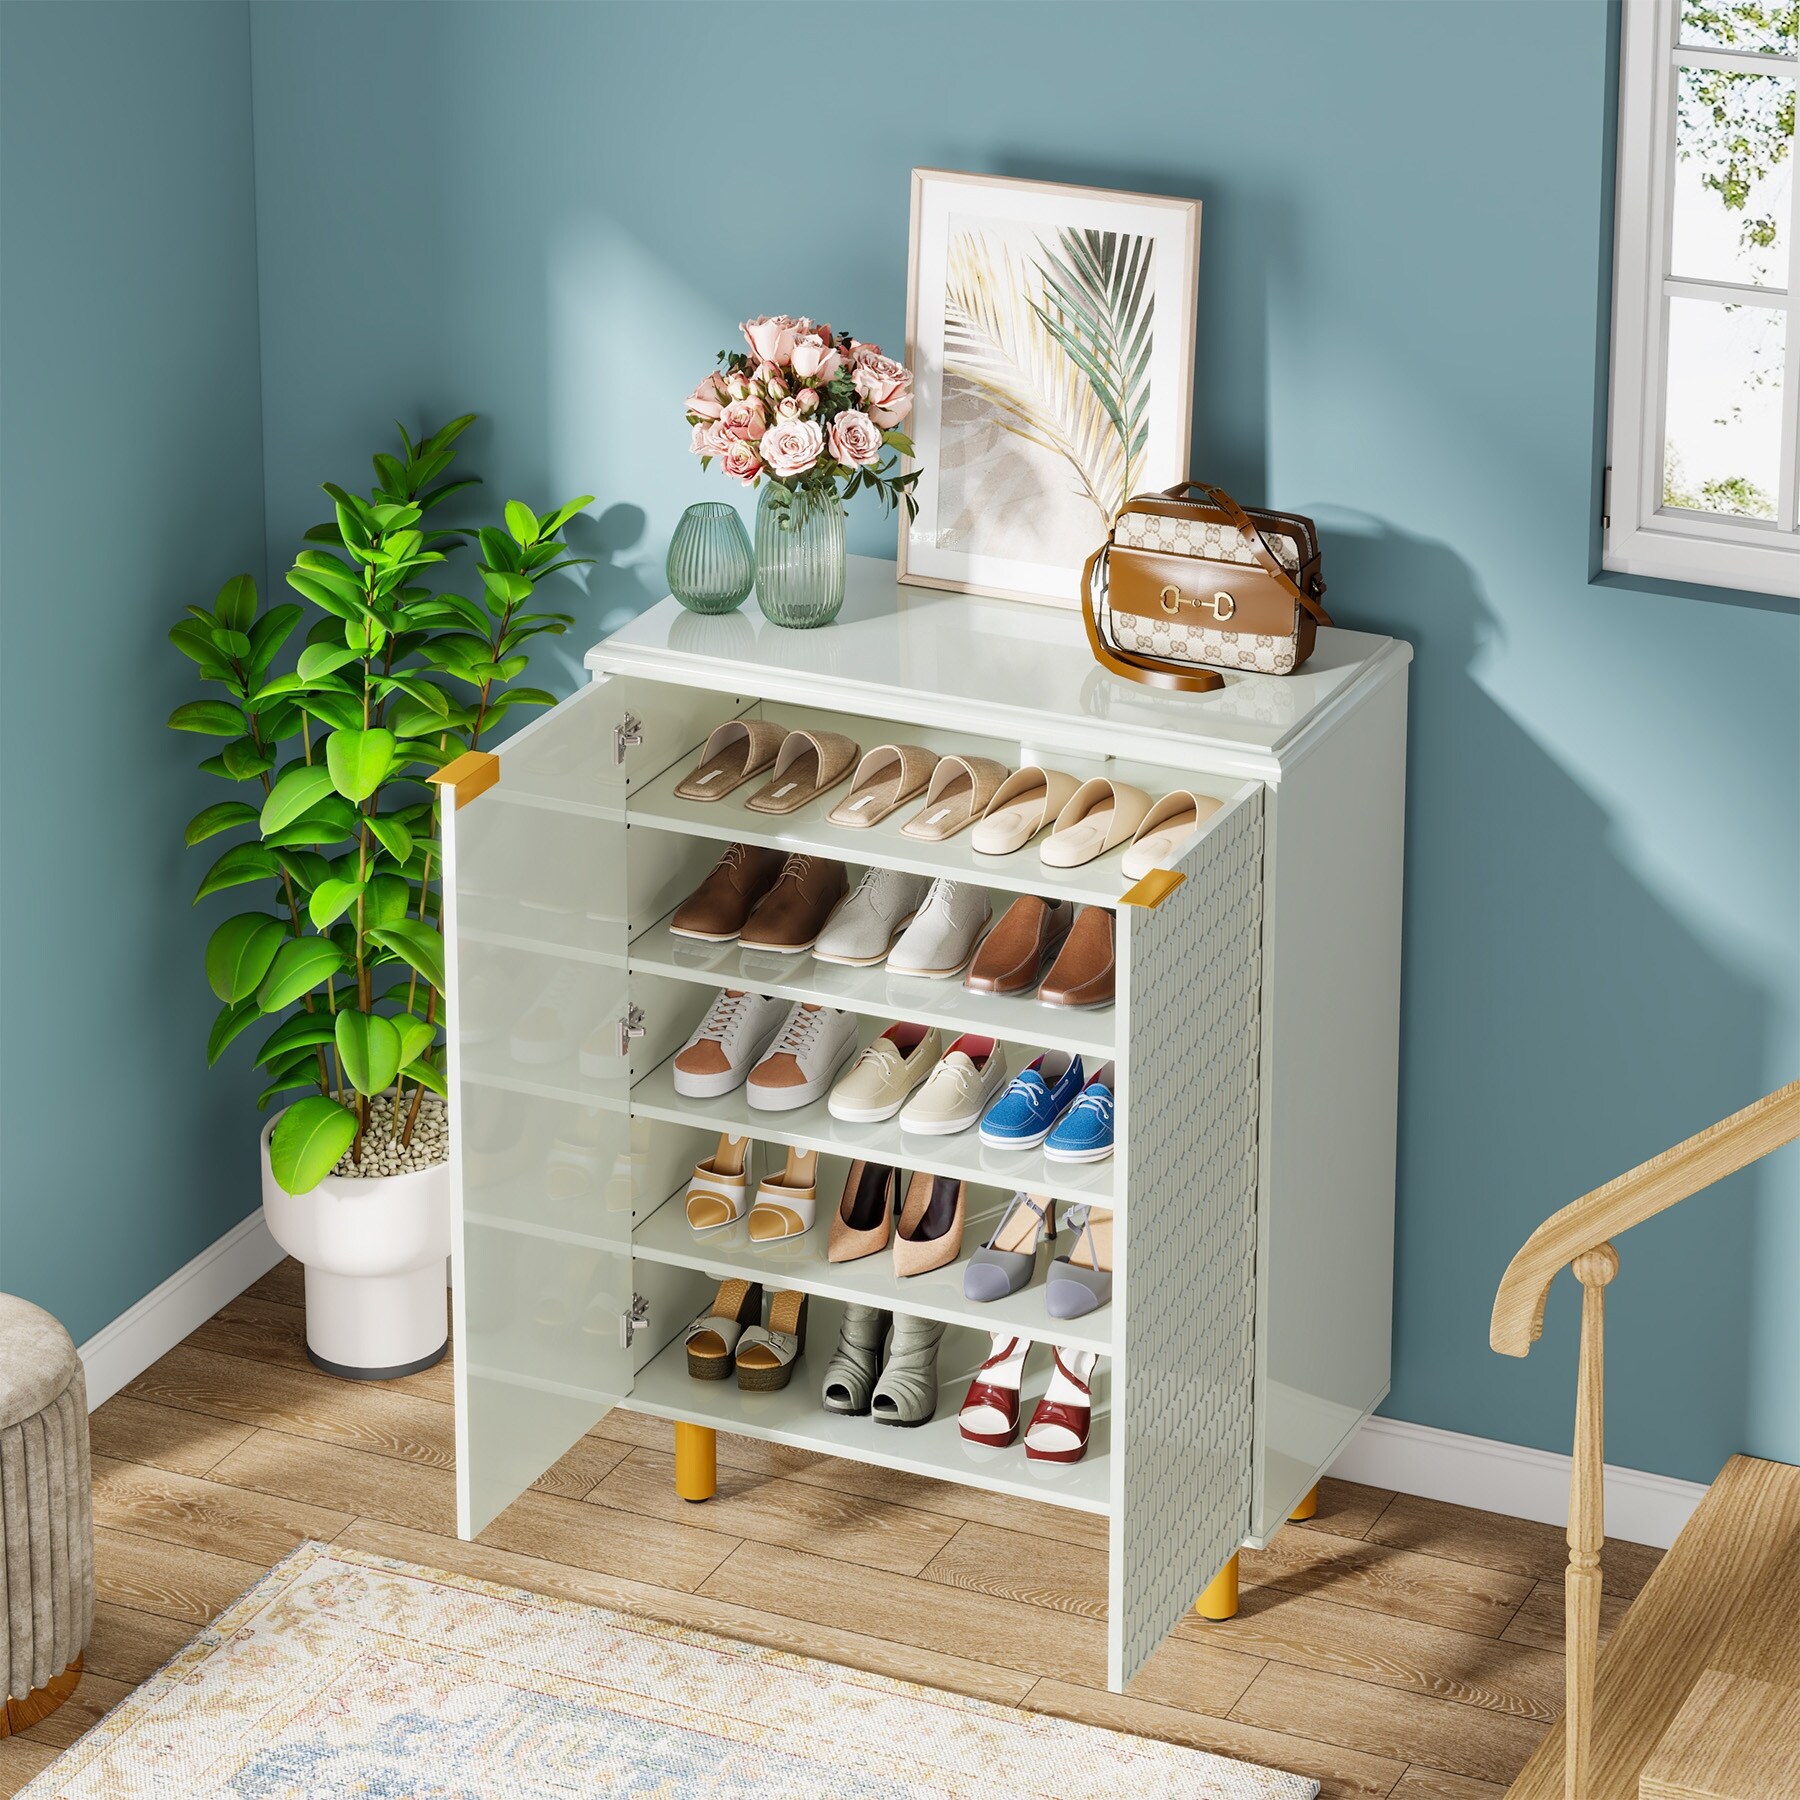 https://ak1.ostkcdn.com/images/products/is/images/direct/8a77ad5327a1691c03d384a90efeedb932658239/20-Pair-Shoe-Cabinet-with-Doors%2C-Entryway-Shoe-Storage-with-Adjustable-Shelves.jpg